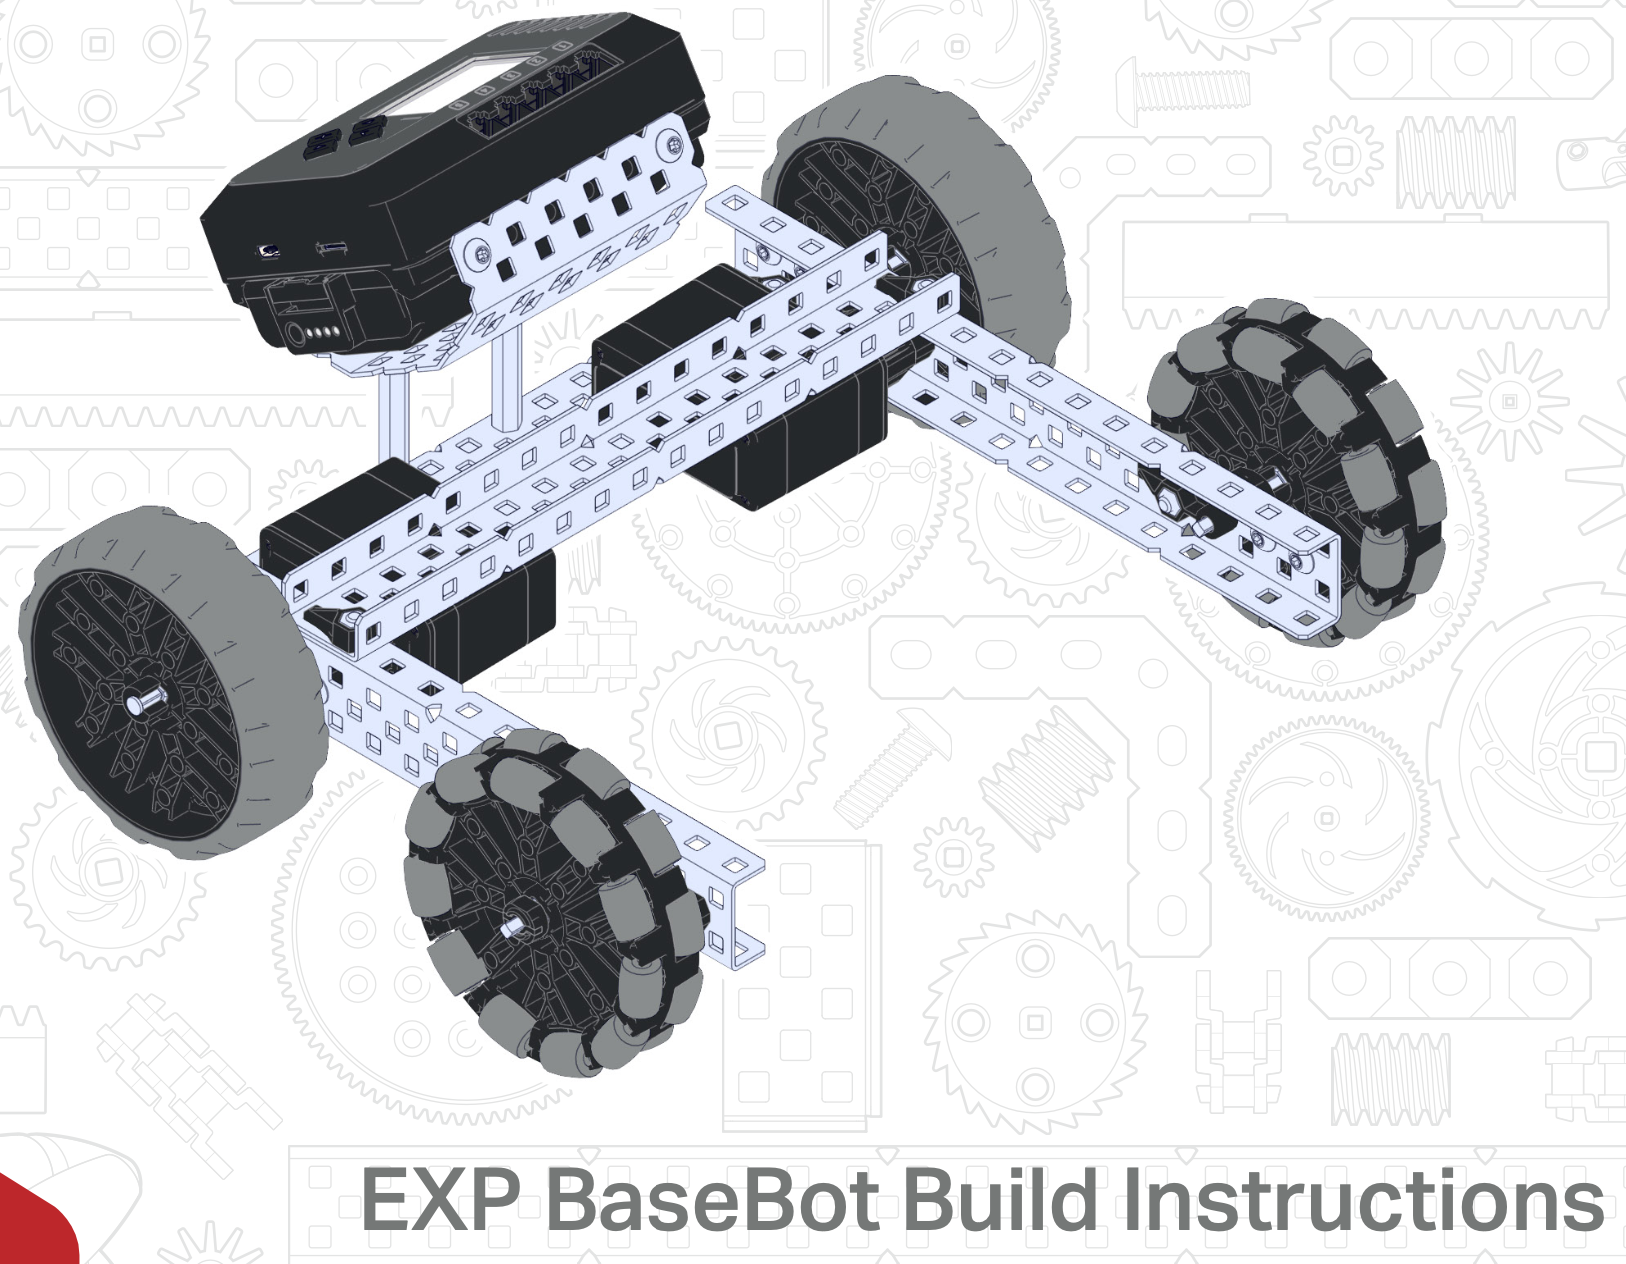 image of the BaseBot from Build Instructions